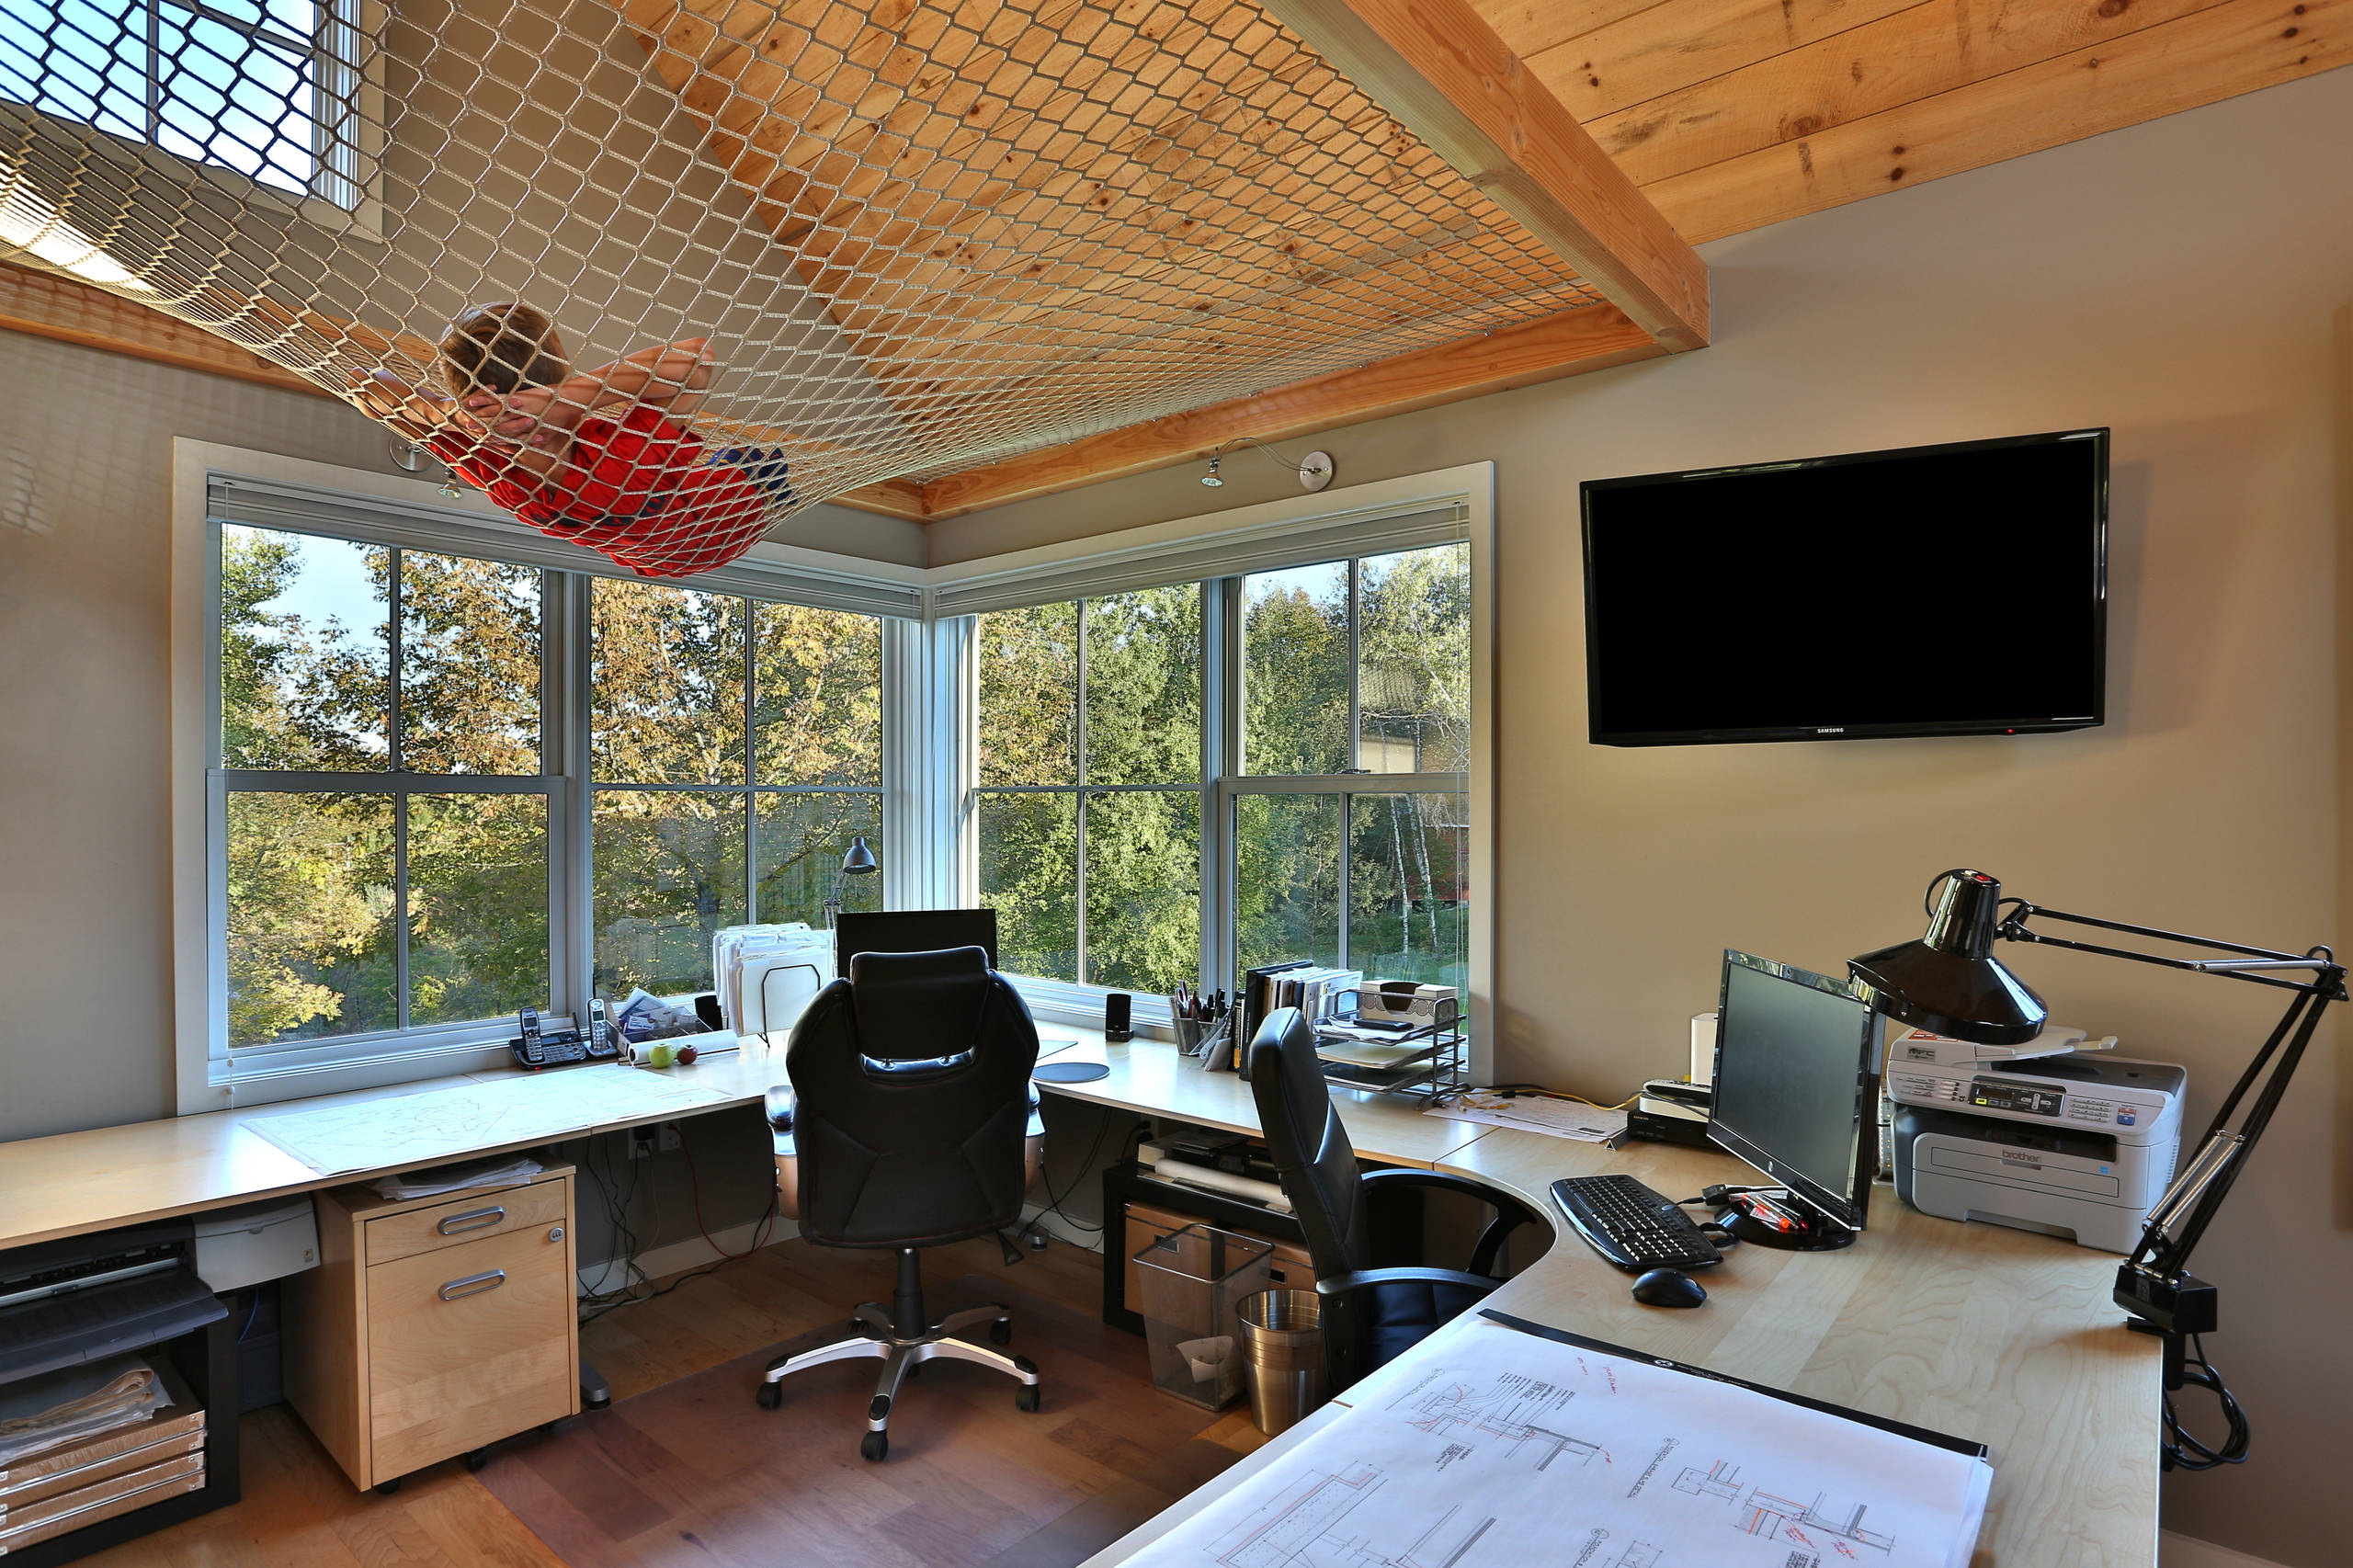 https://st.hzcdn.com/simgs/pictures/home-offices/architect-s-studio-kevin-browne-architecture-img~2fd1aa6d036e1960_14-3315-1-0e9d306.jpg